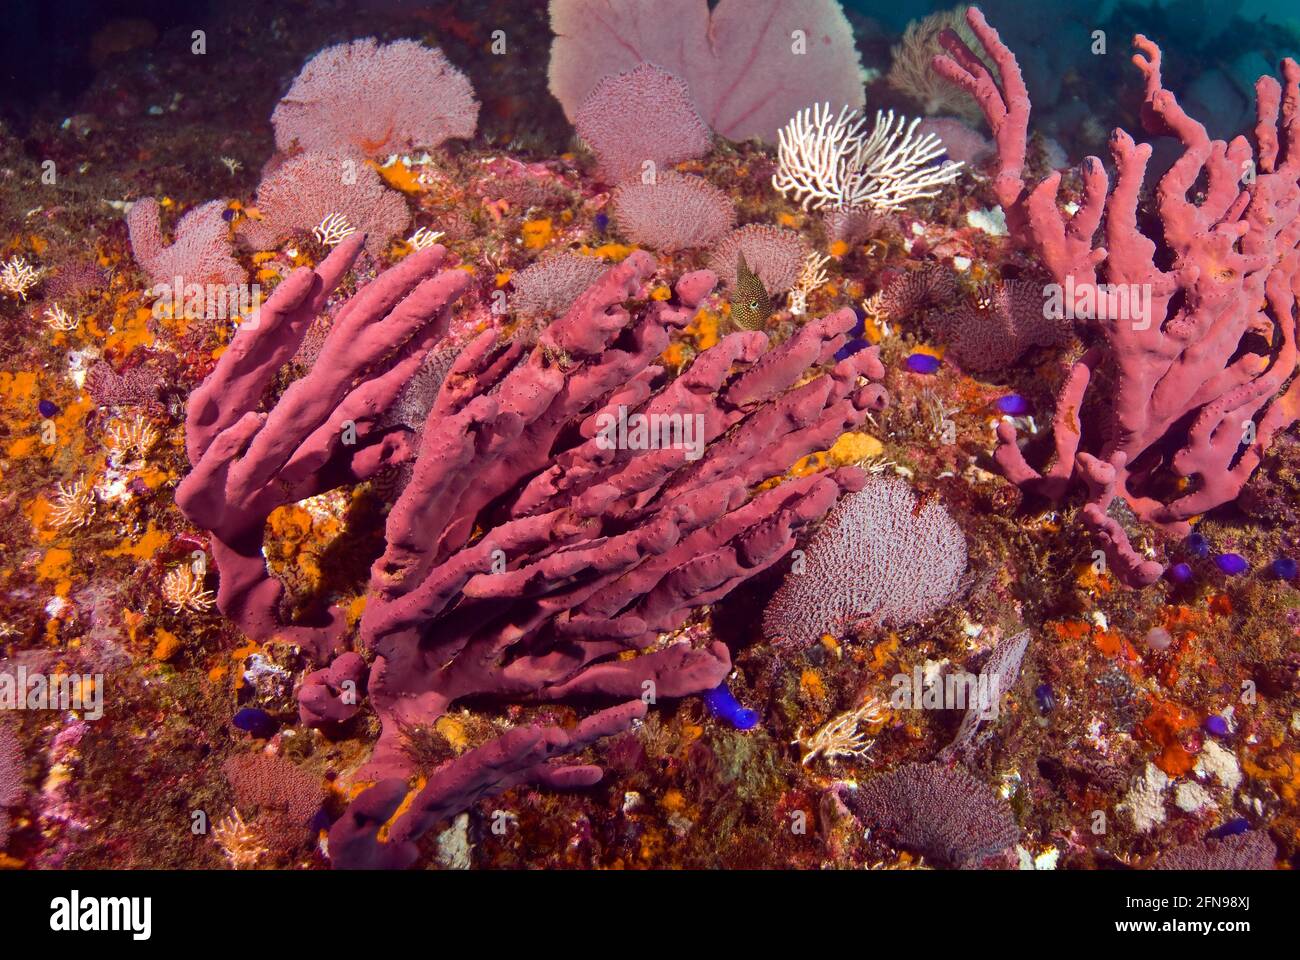 Conglomerate of Red Sea fans and sponges, Coiba Marine Park, Panama Stock Photo